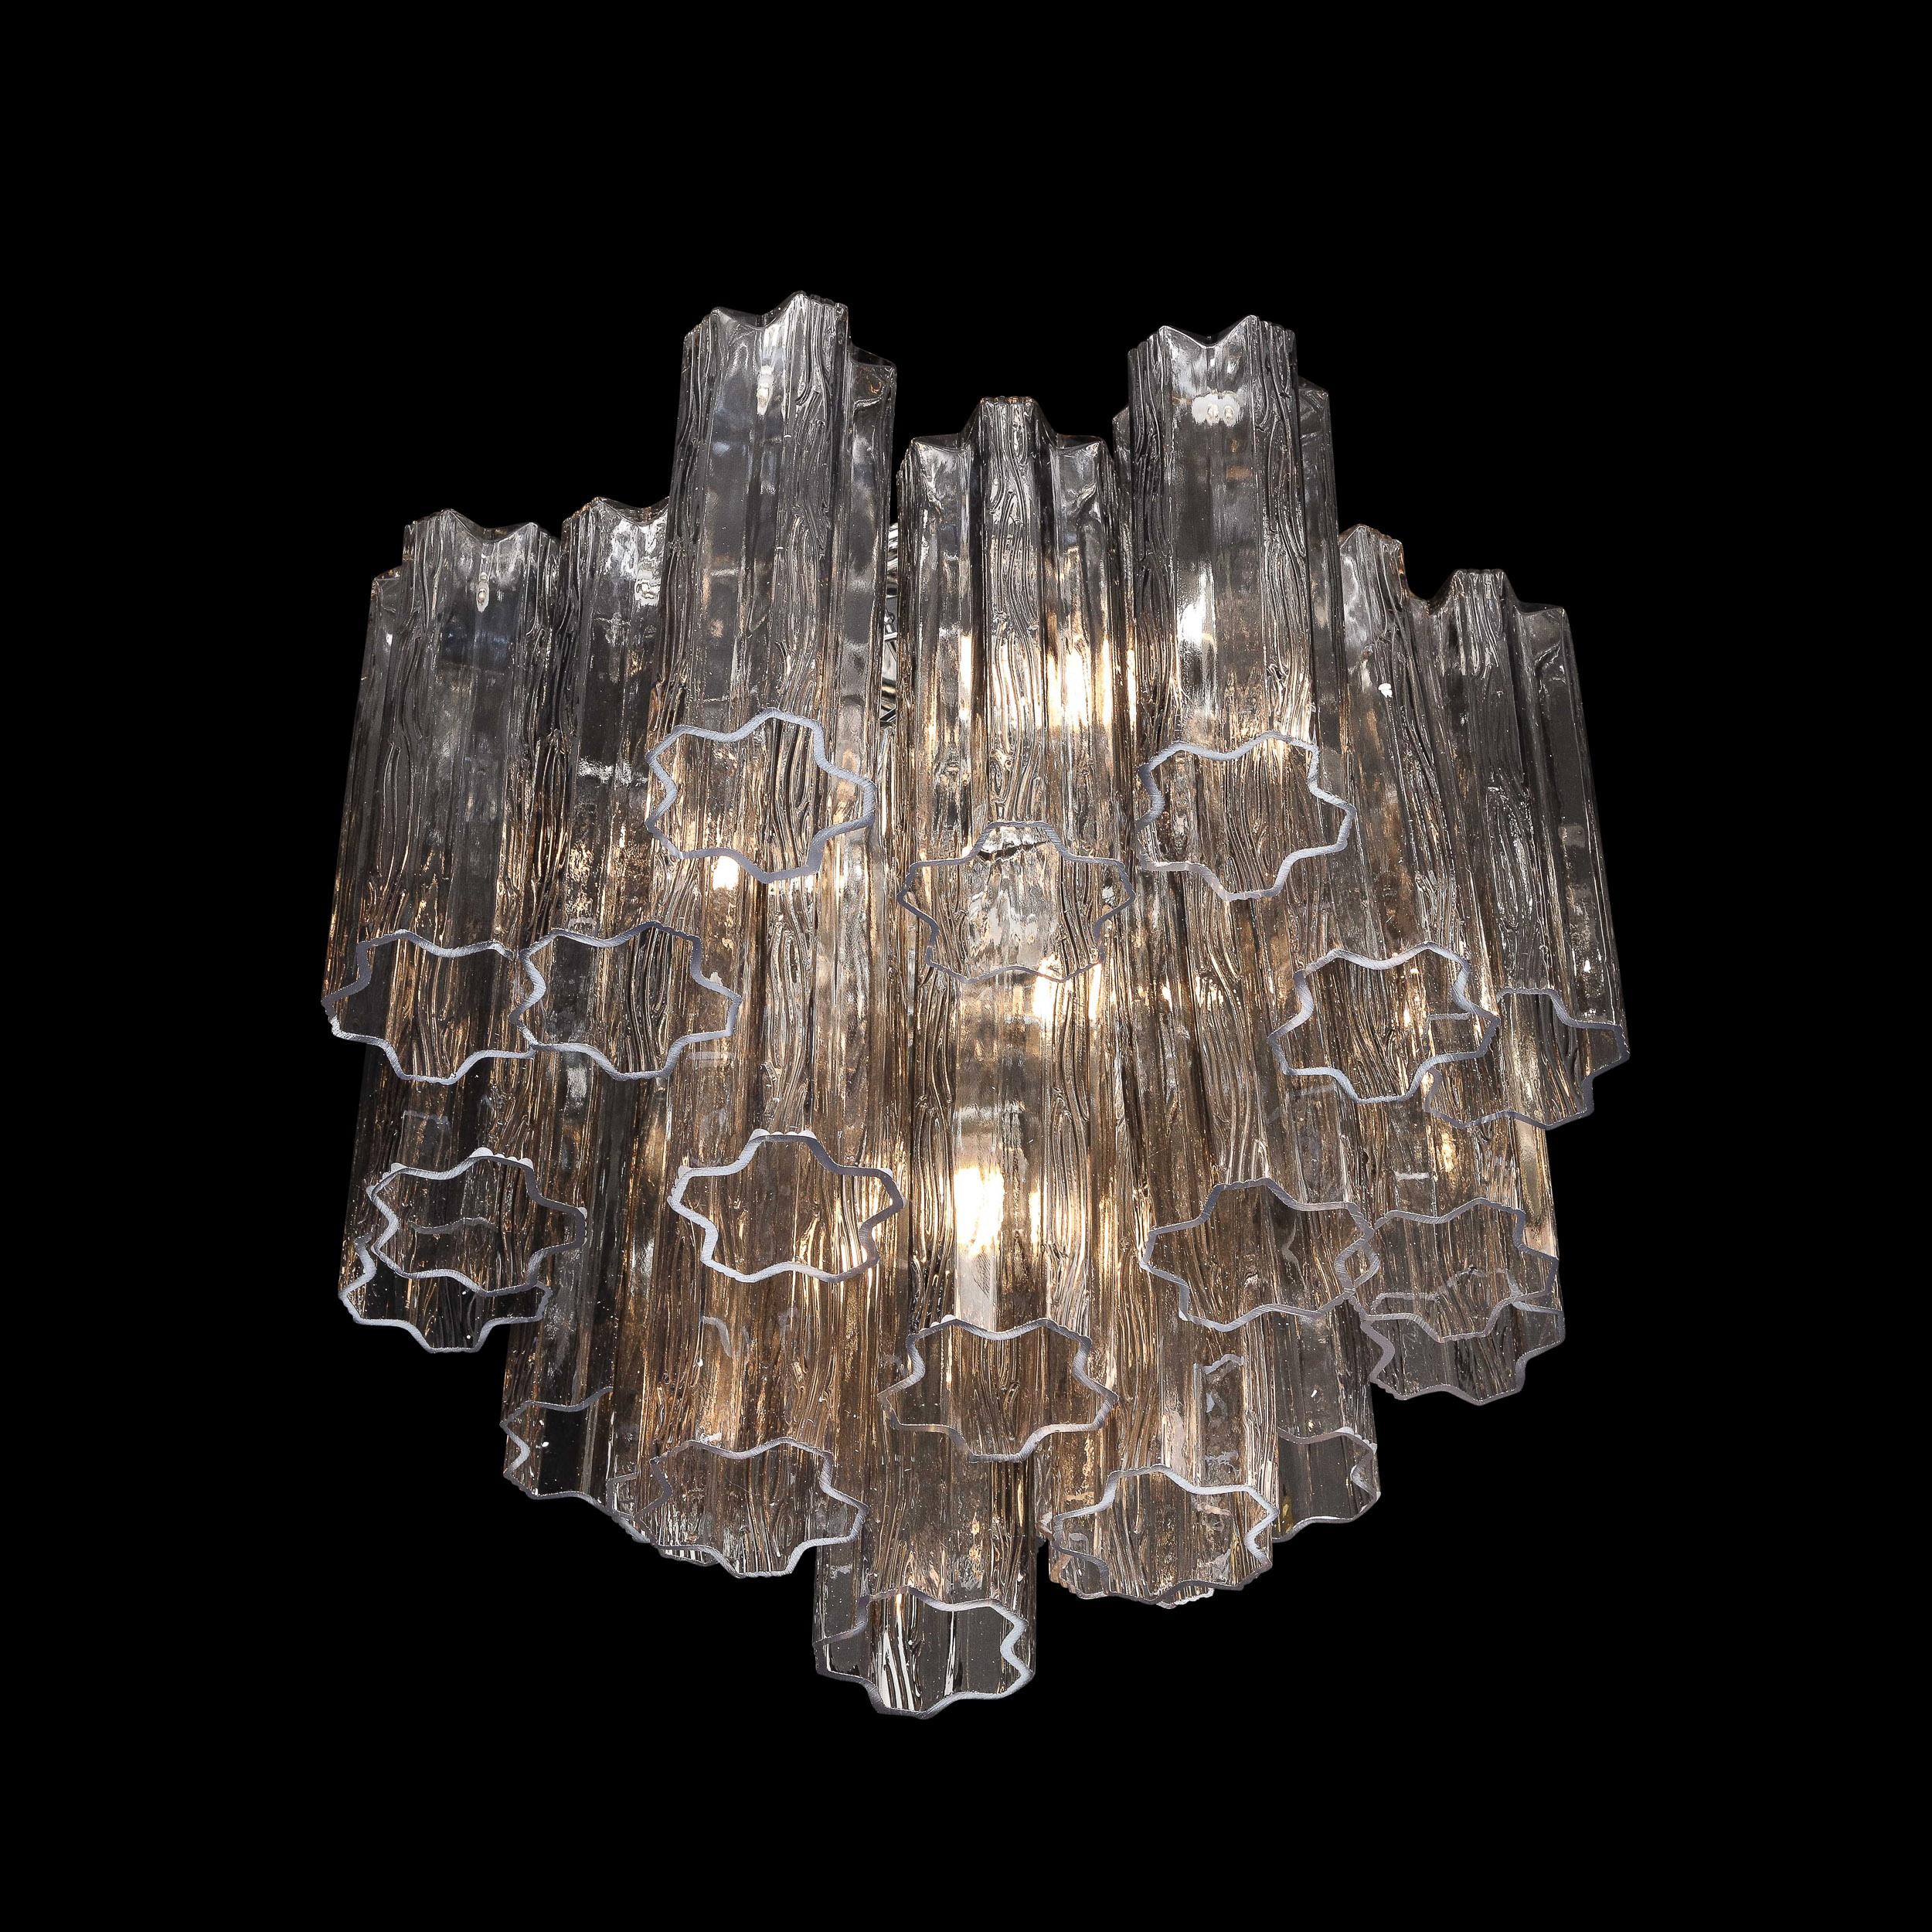 Italian Modernist Smoked Glass Multi-Tier Stepped Tronchi Chandelier w/ Chrome Fittings For Sale